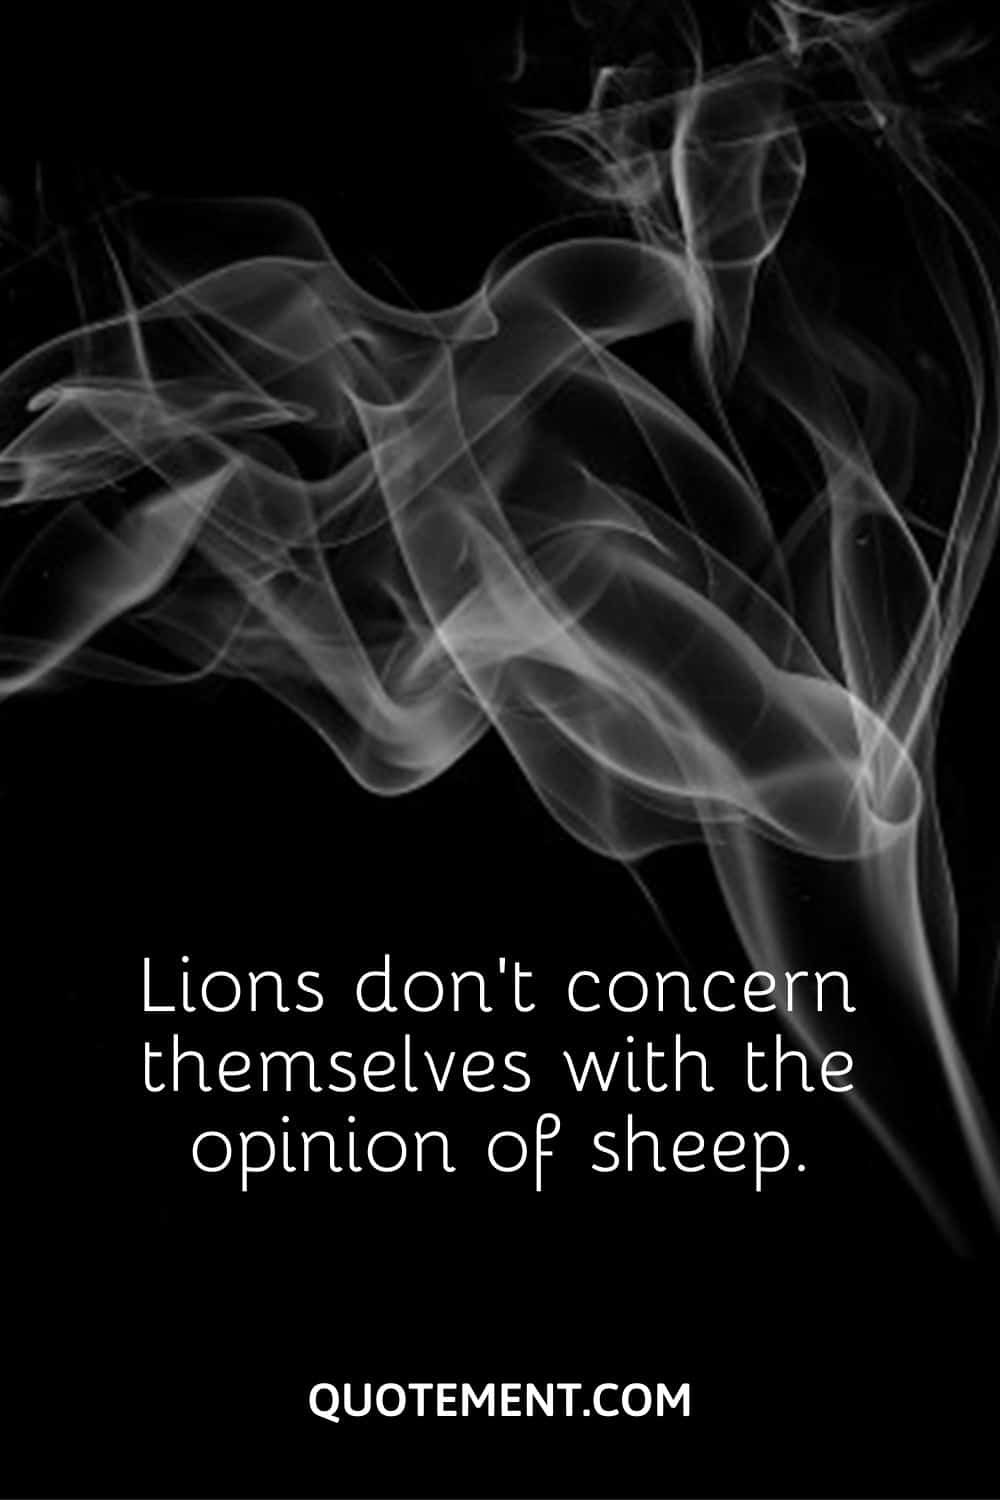 Lions don’t concern themselves with the opinion of sheep.